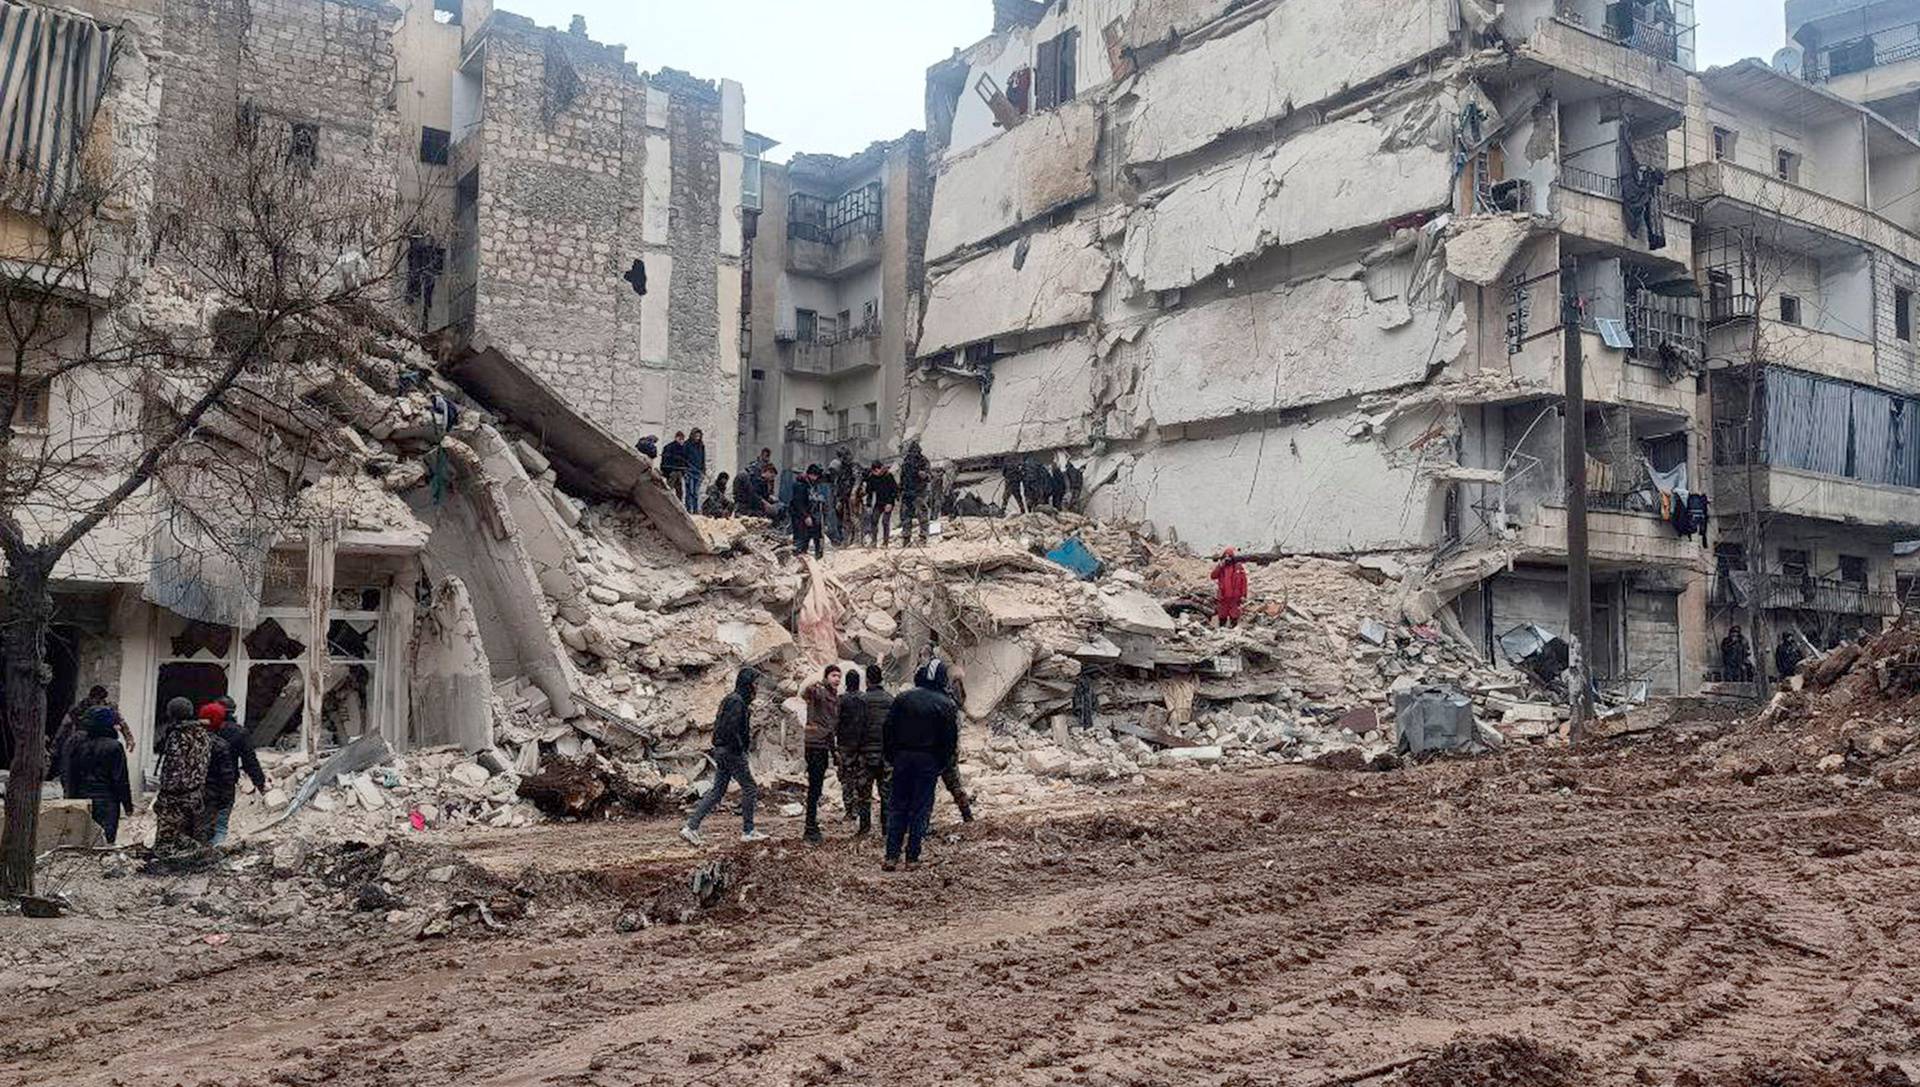 Rescuers search for survivors at the site of a collapsed building, following an earthquake in Aleppo